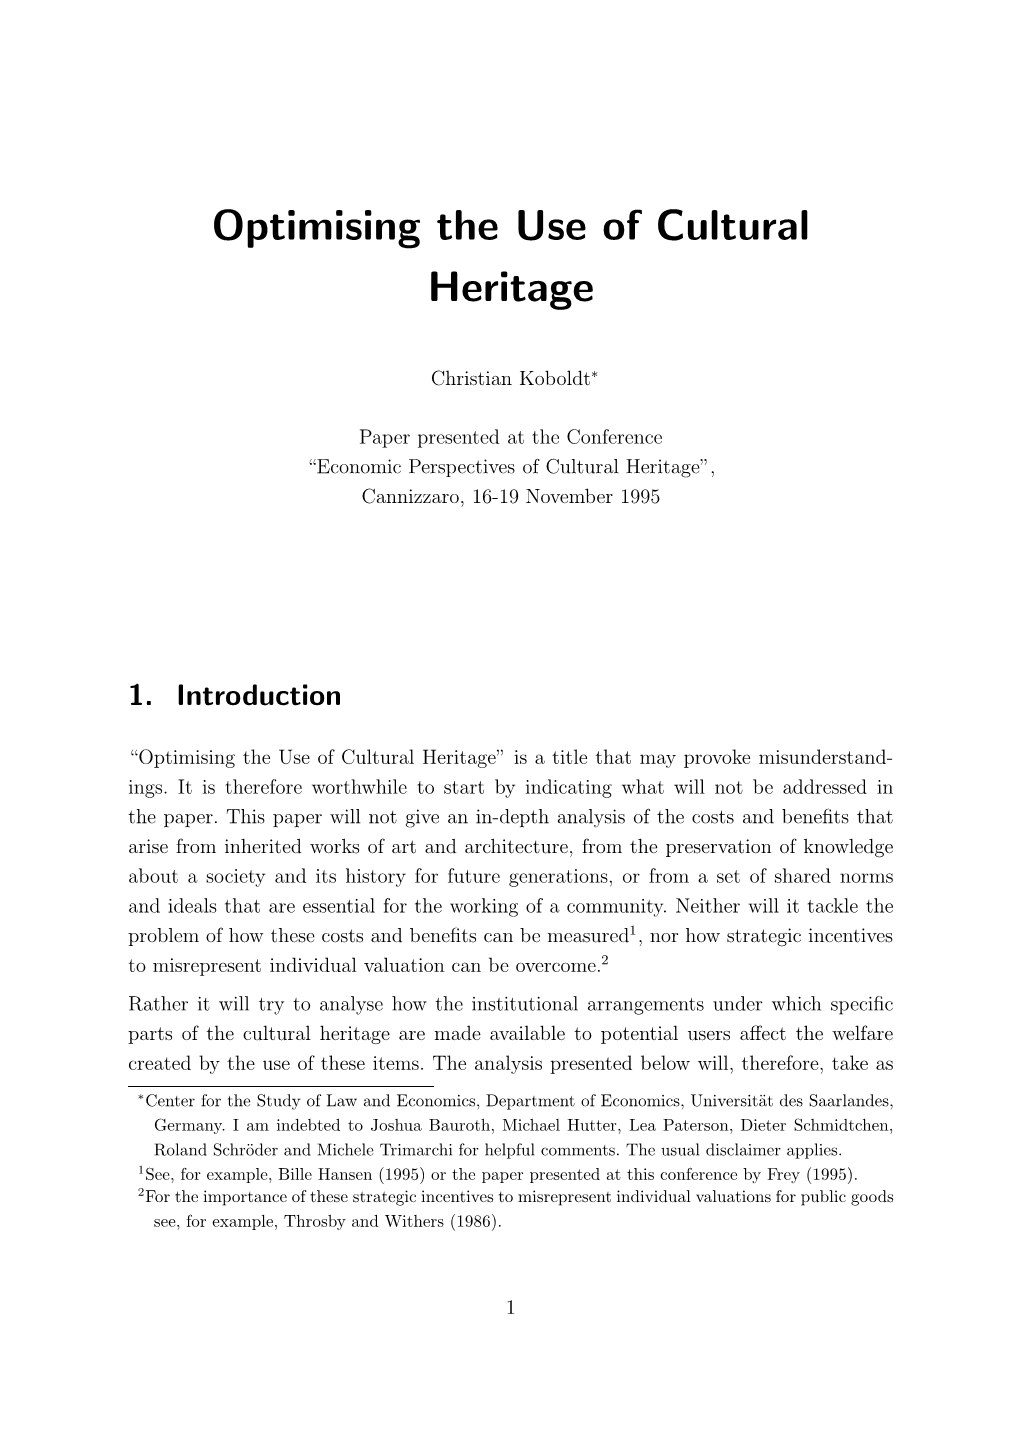 Optimising the Use of Cultural Heritage